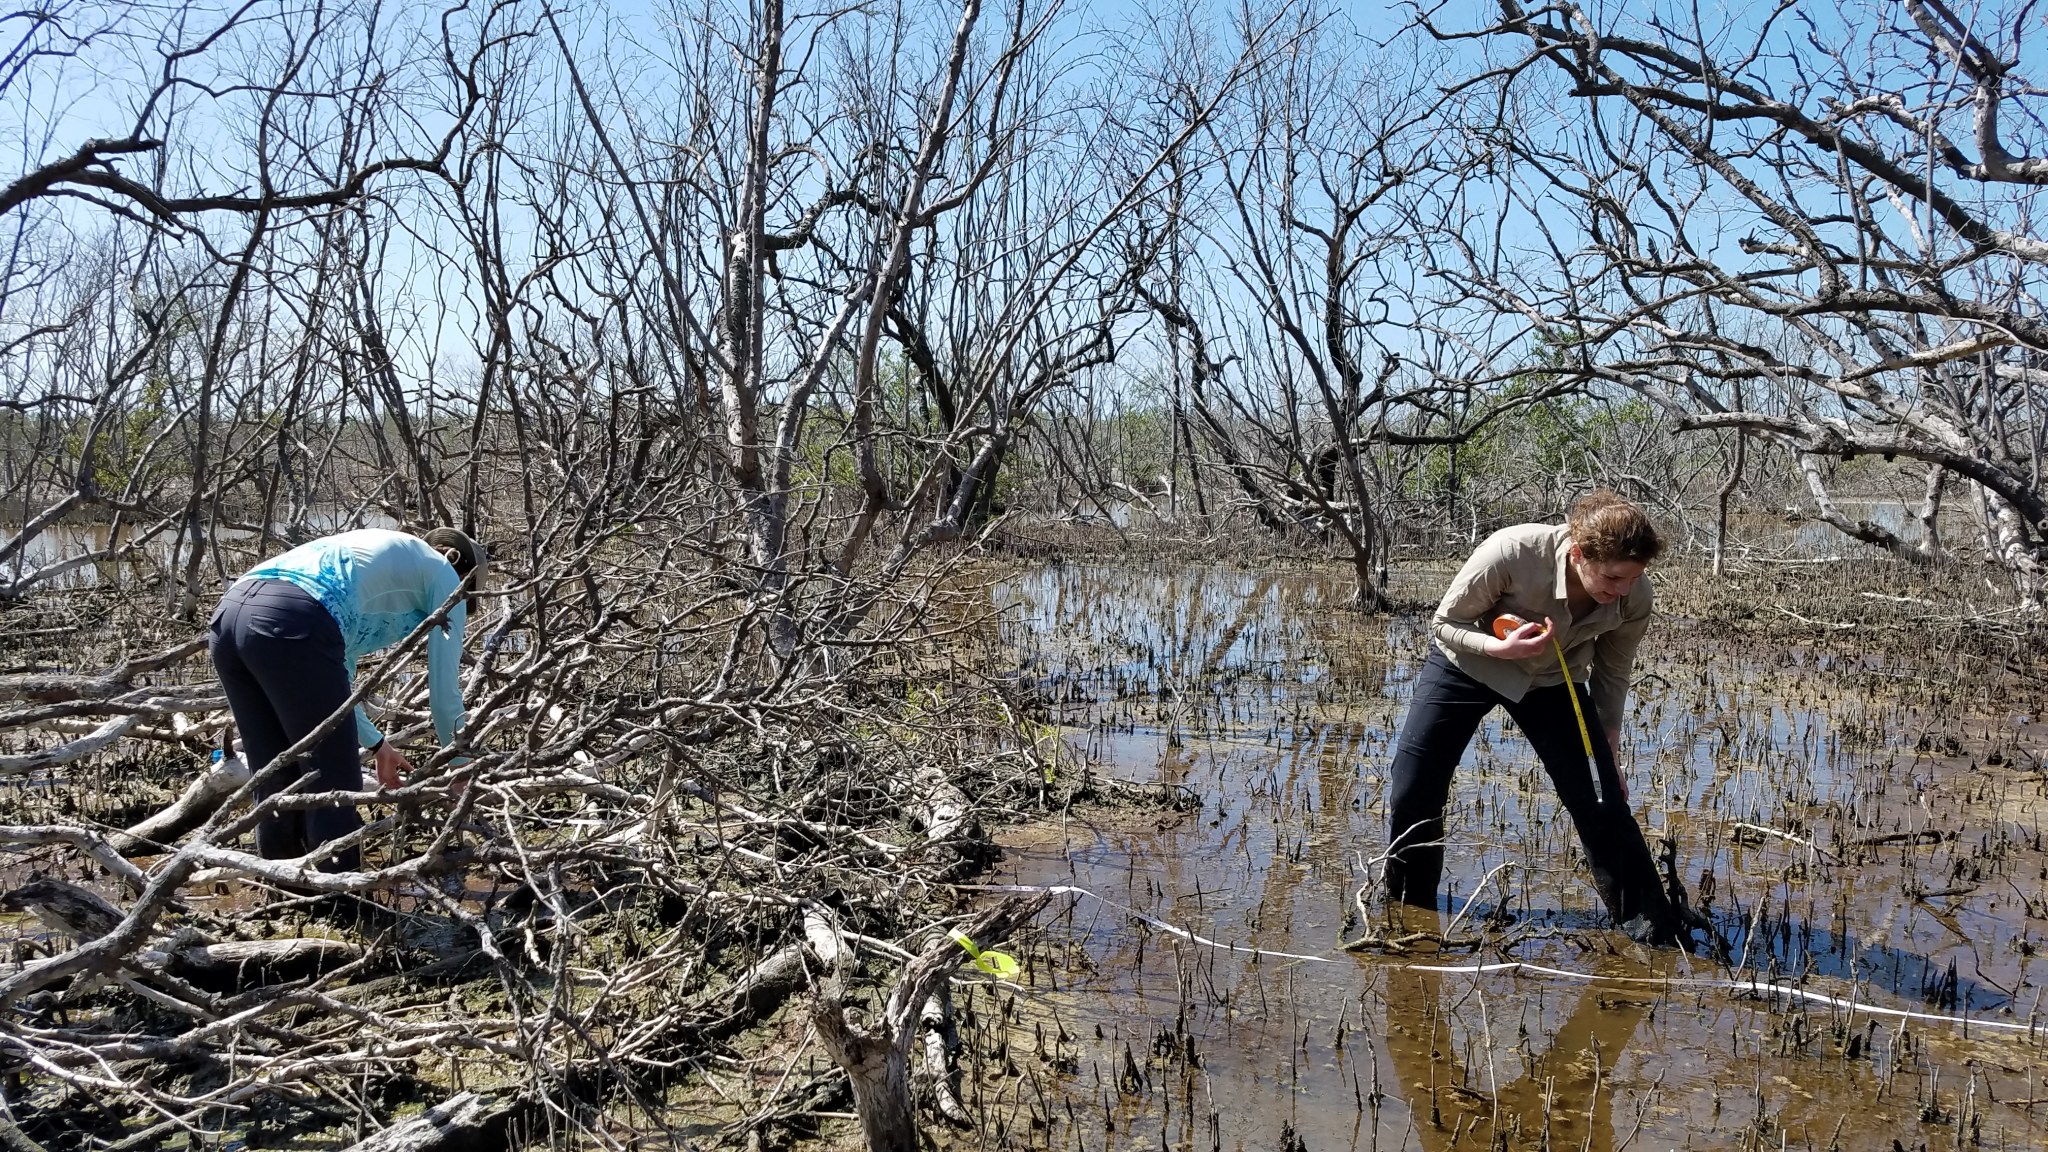 Scientists stand ankle-deep in water and mud, using a measuring tape on the ground to count the number of downed branches and stumps in a dead mangrove forest.